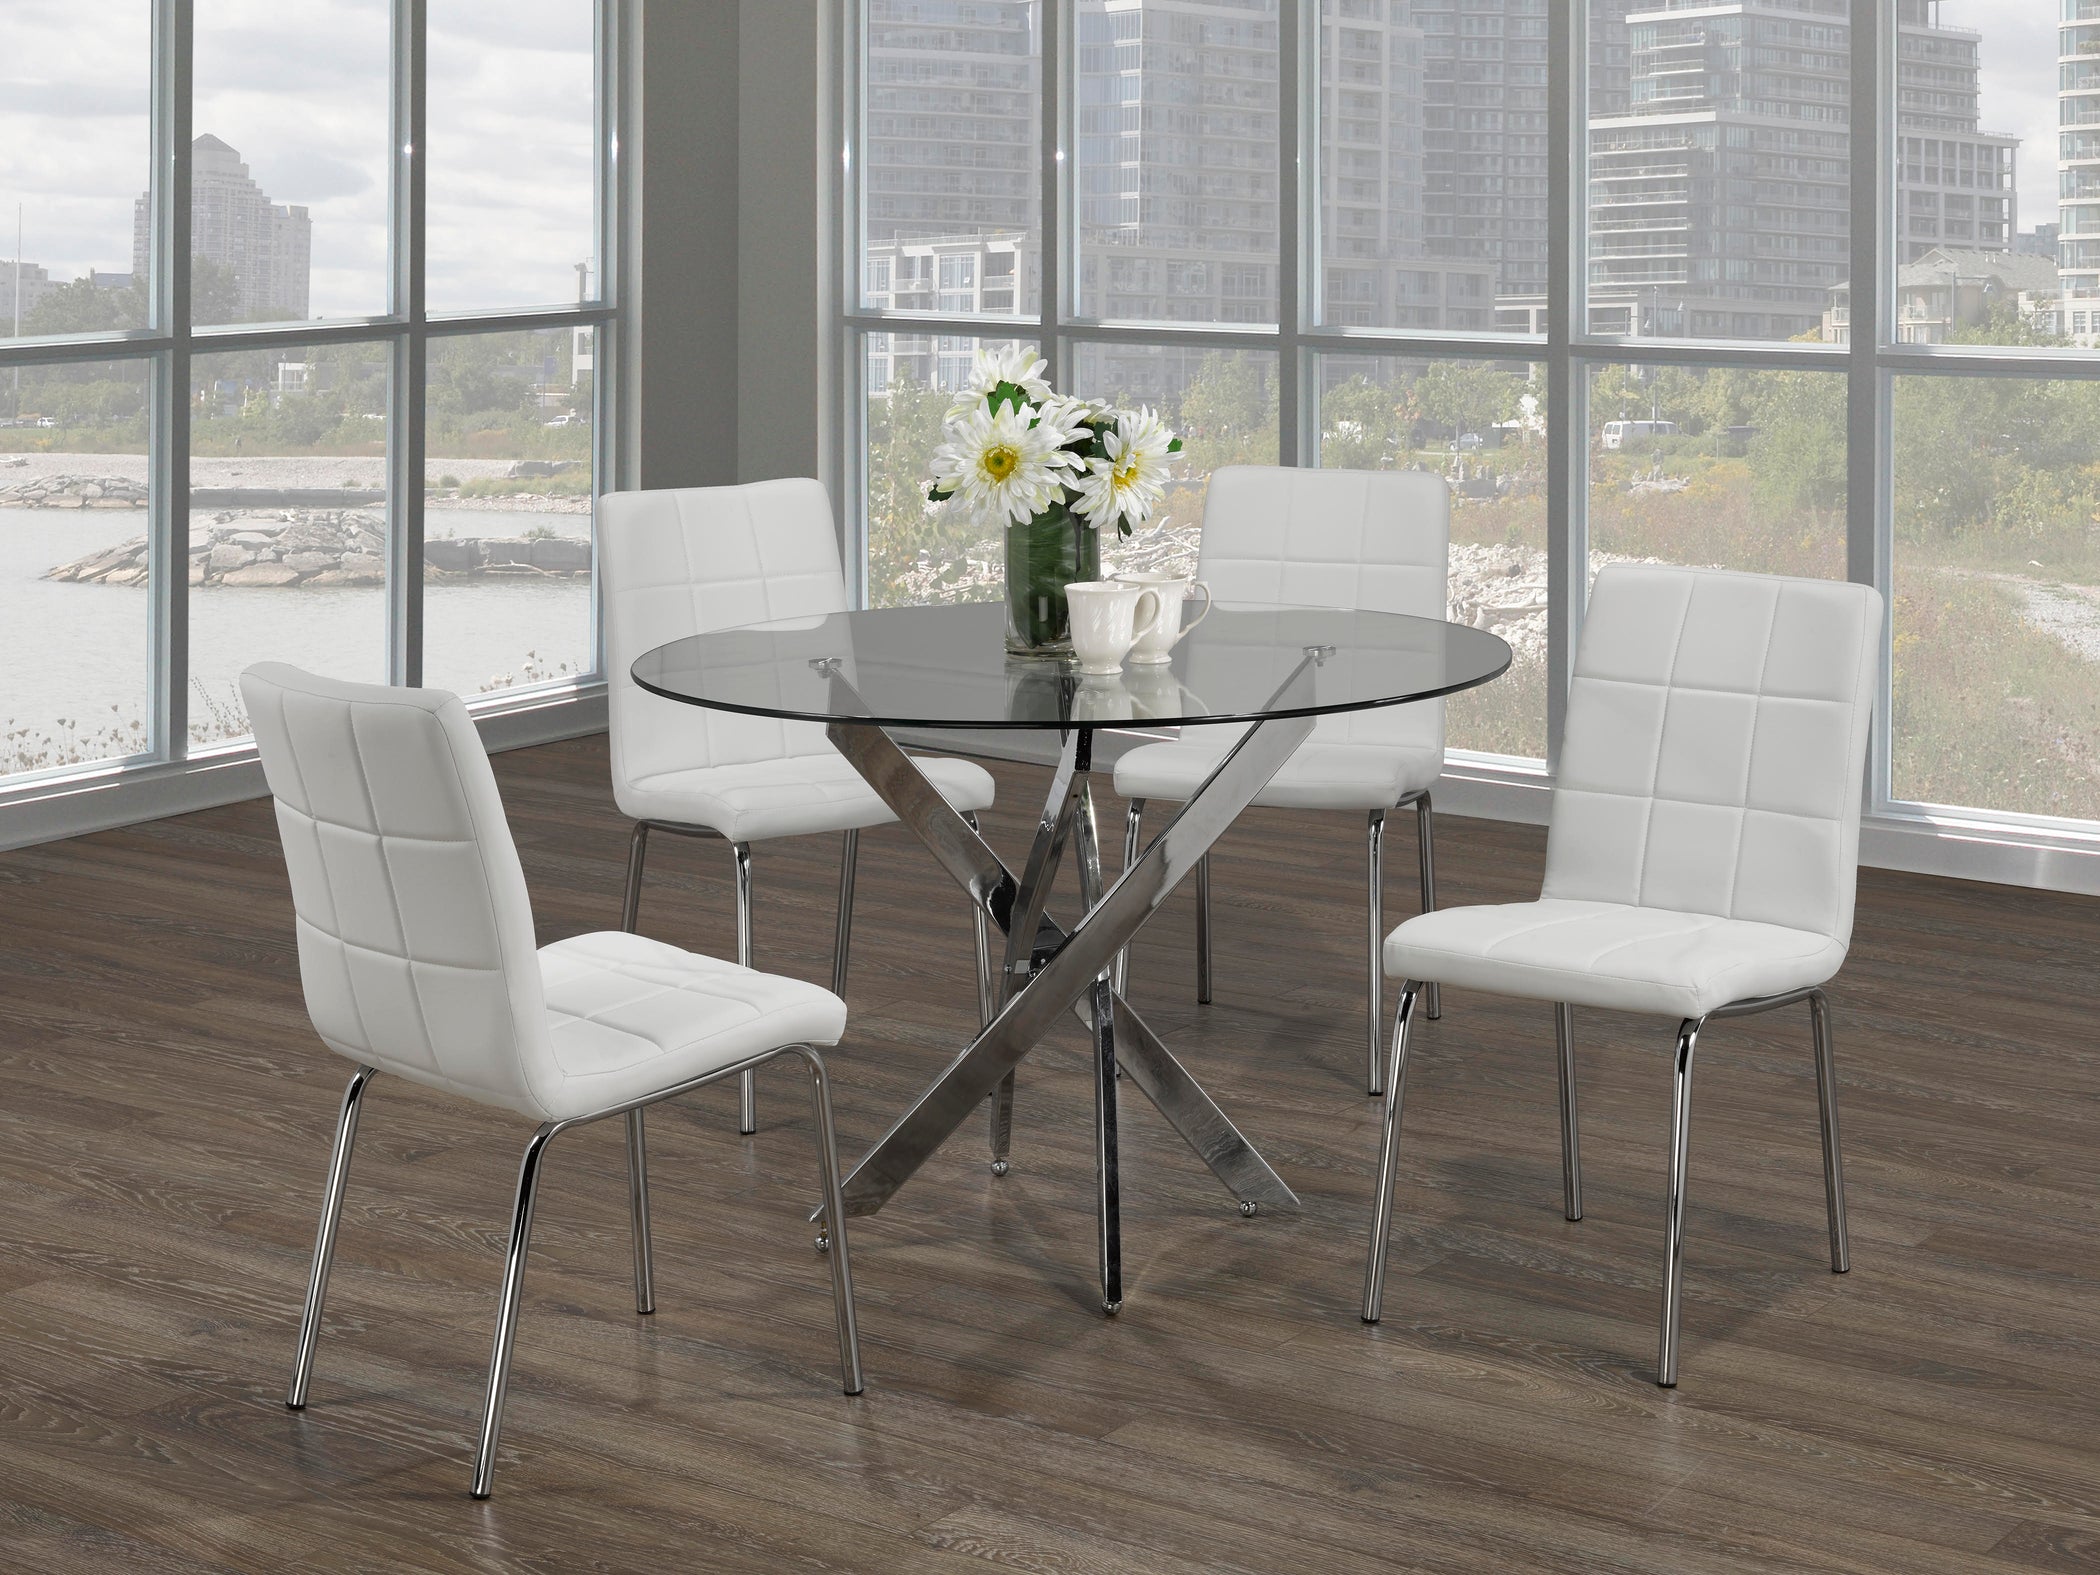 70 Inch Round Glass Dining Room Tables